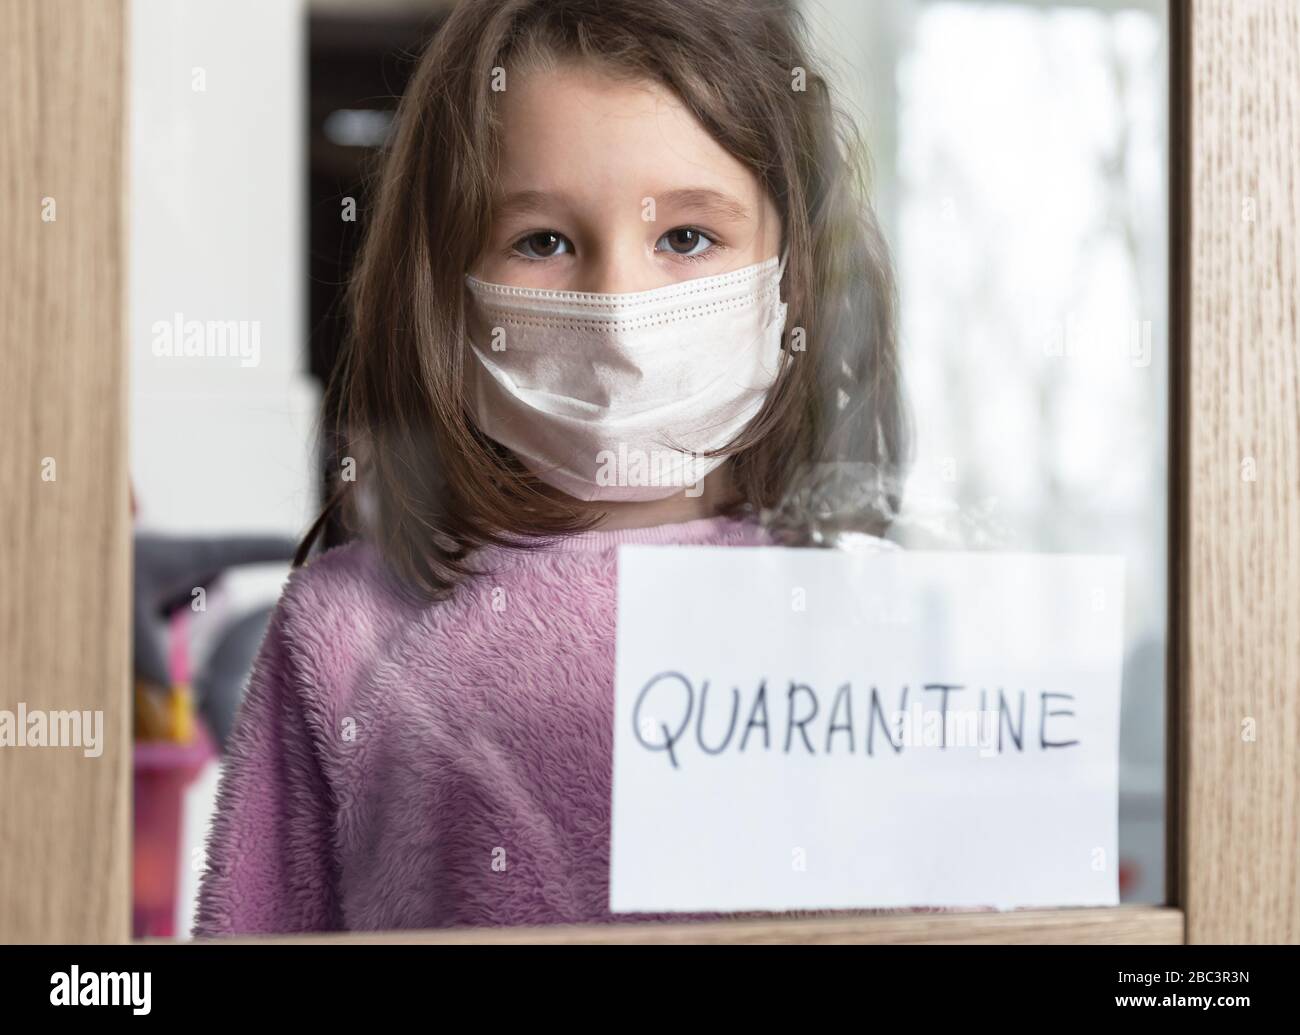 COVID-19 coronavirus concept, little girl in medical mask looking through window with note Quarantine at home. Sad kid during quarantine due to COVID Stock Photo